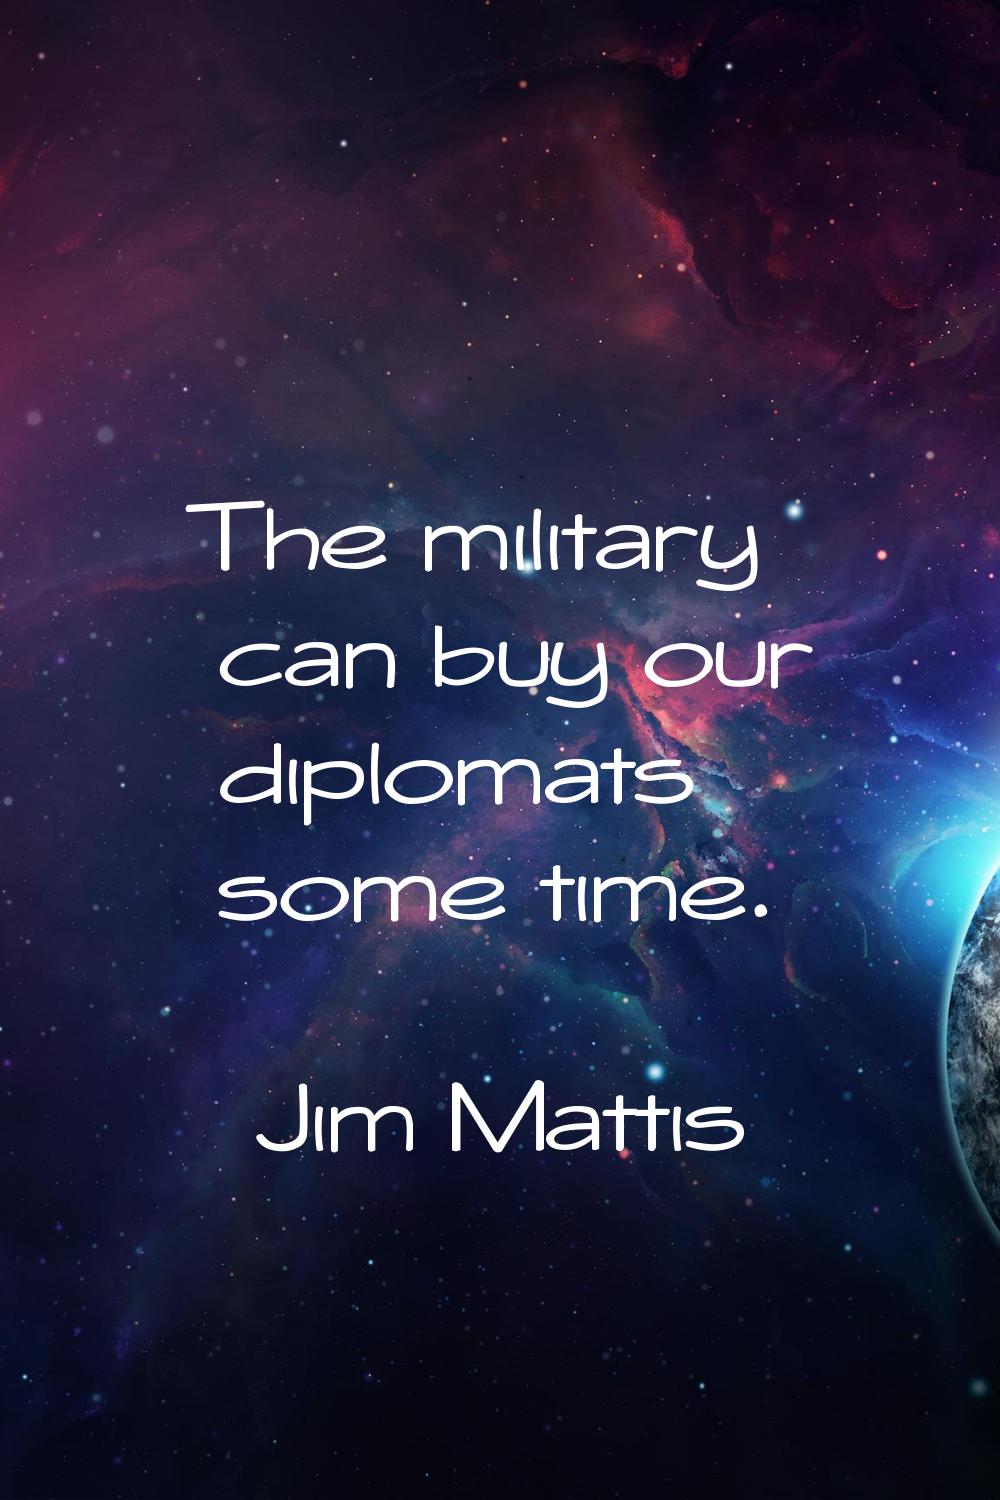 The military can buy our diplomats some time.